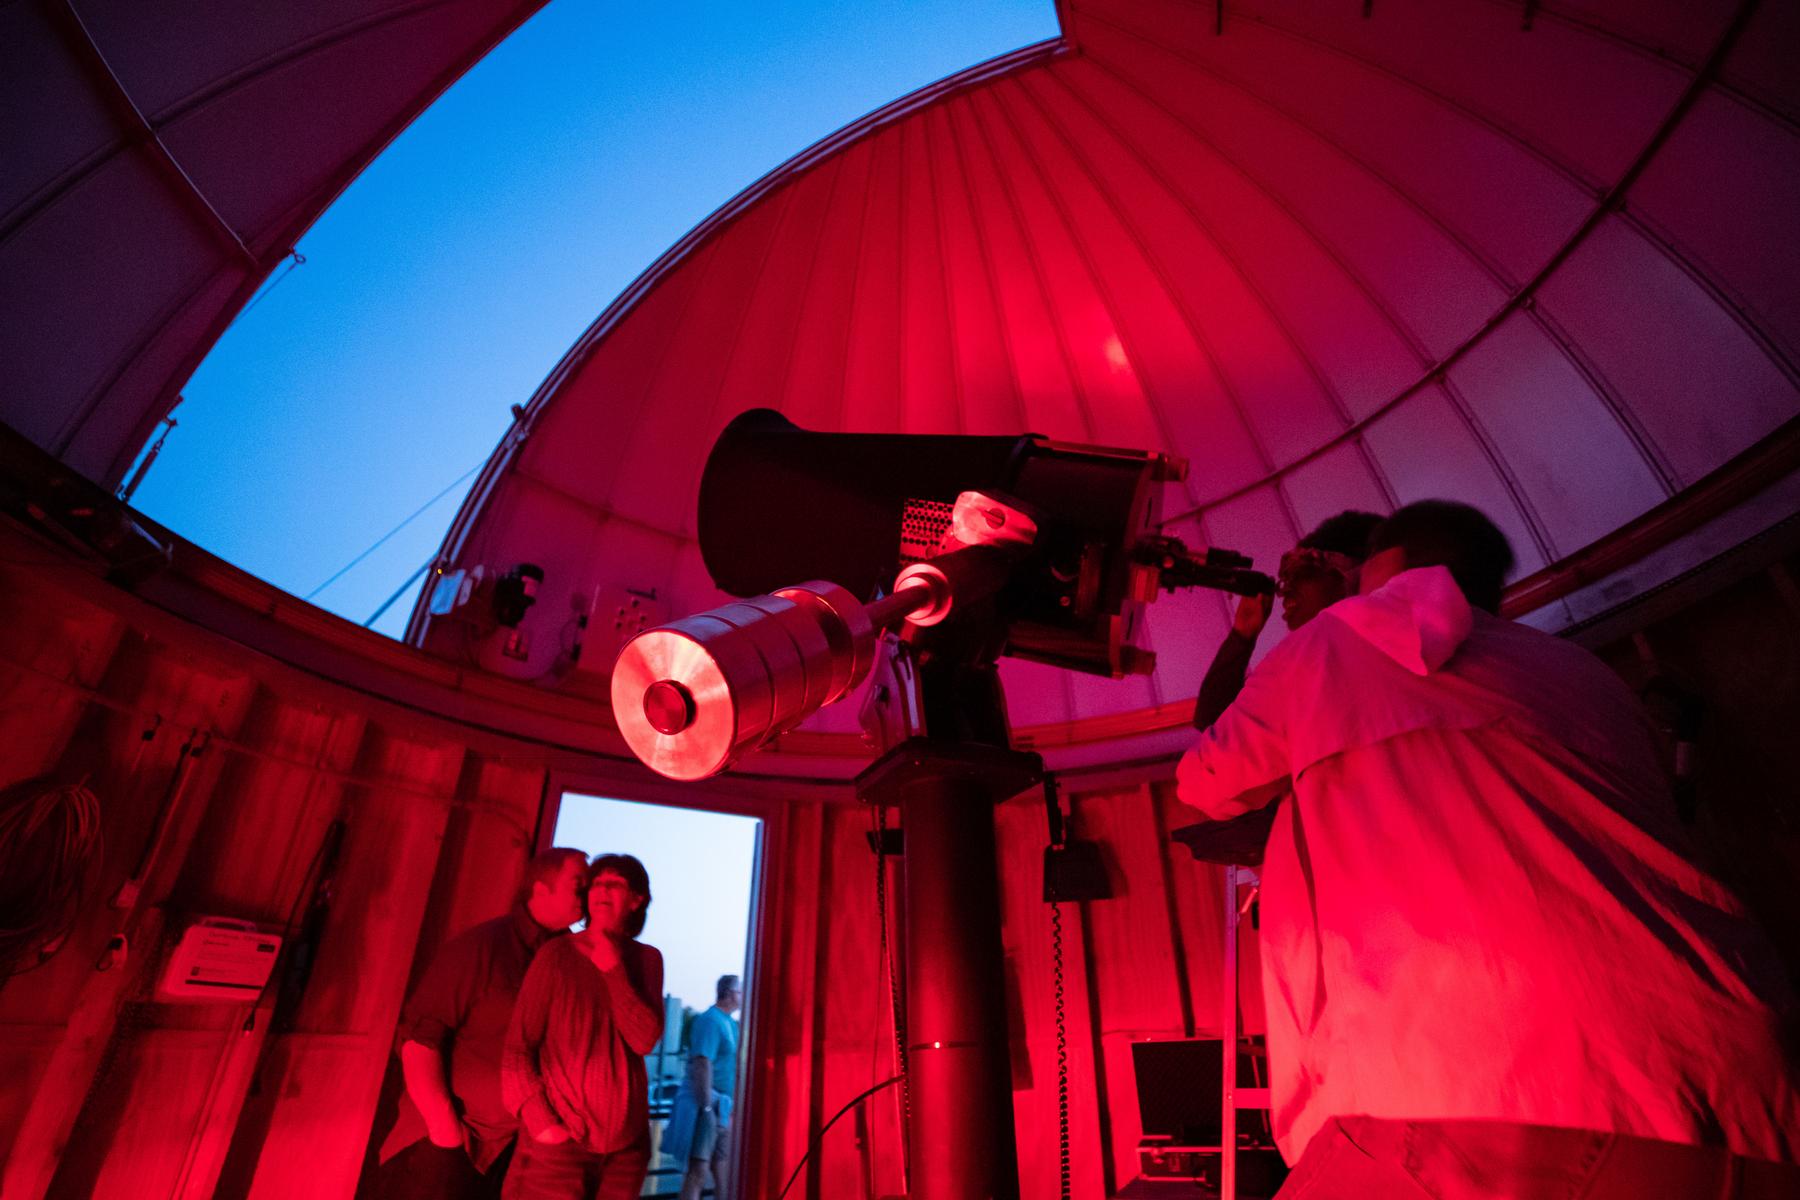 Austin Peay State University’s Department of Physics, Engineering and Astronomy gave children and adult astronomy enthusiasts a chance to observe Saturn, Jupiter, star clusters and nebulae at the university’s observatory on Saturday, Sept. 17. 